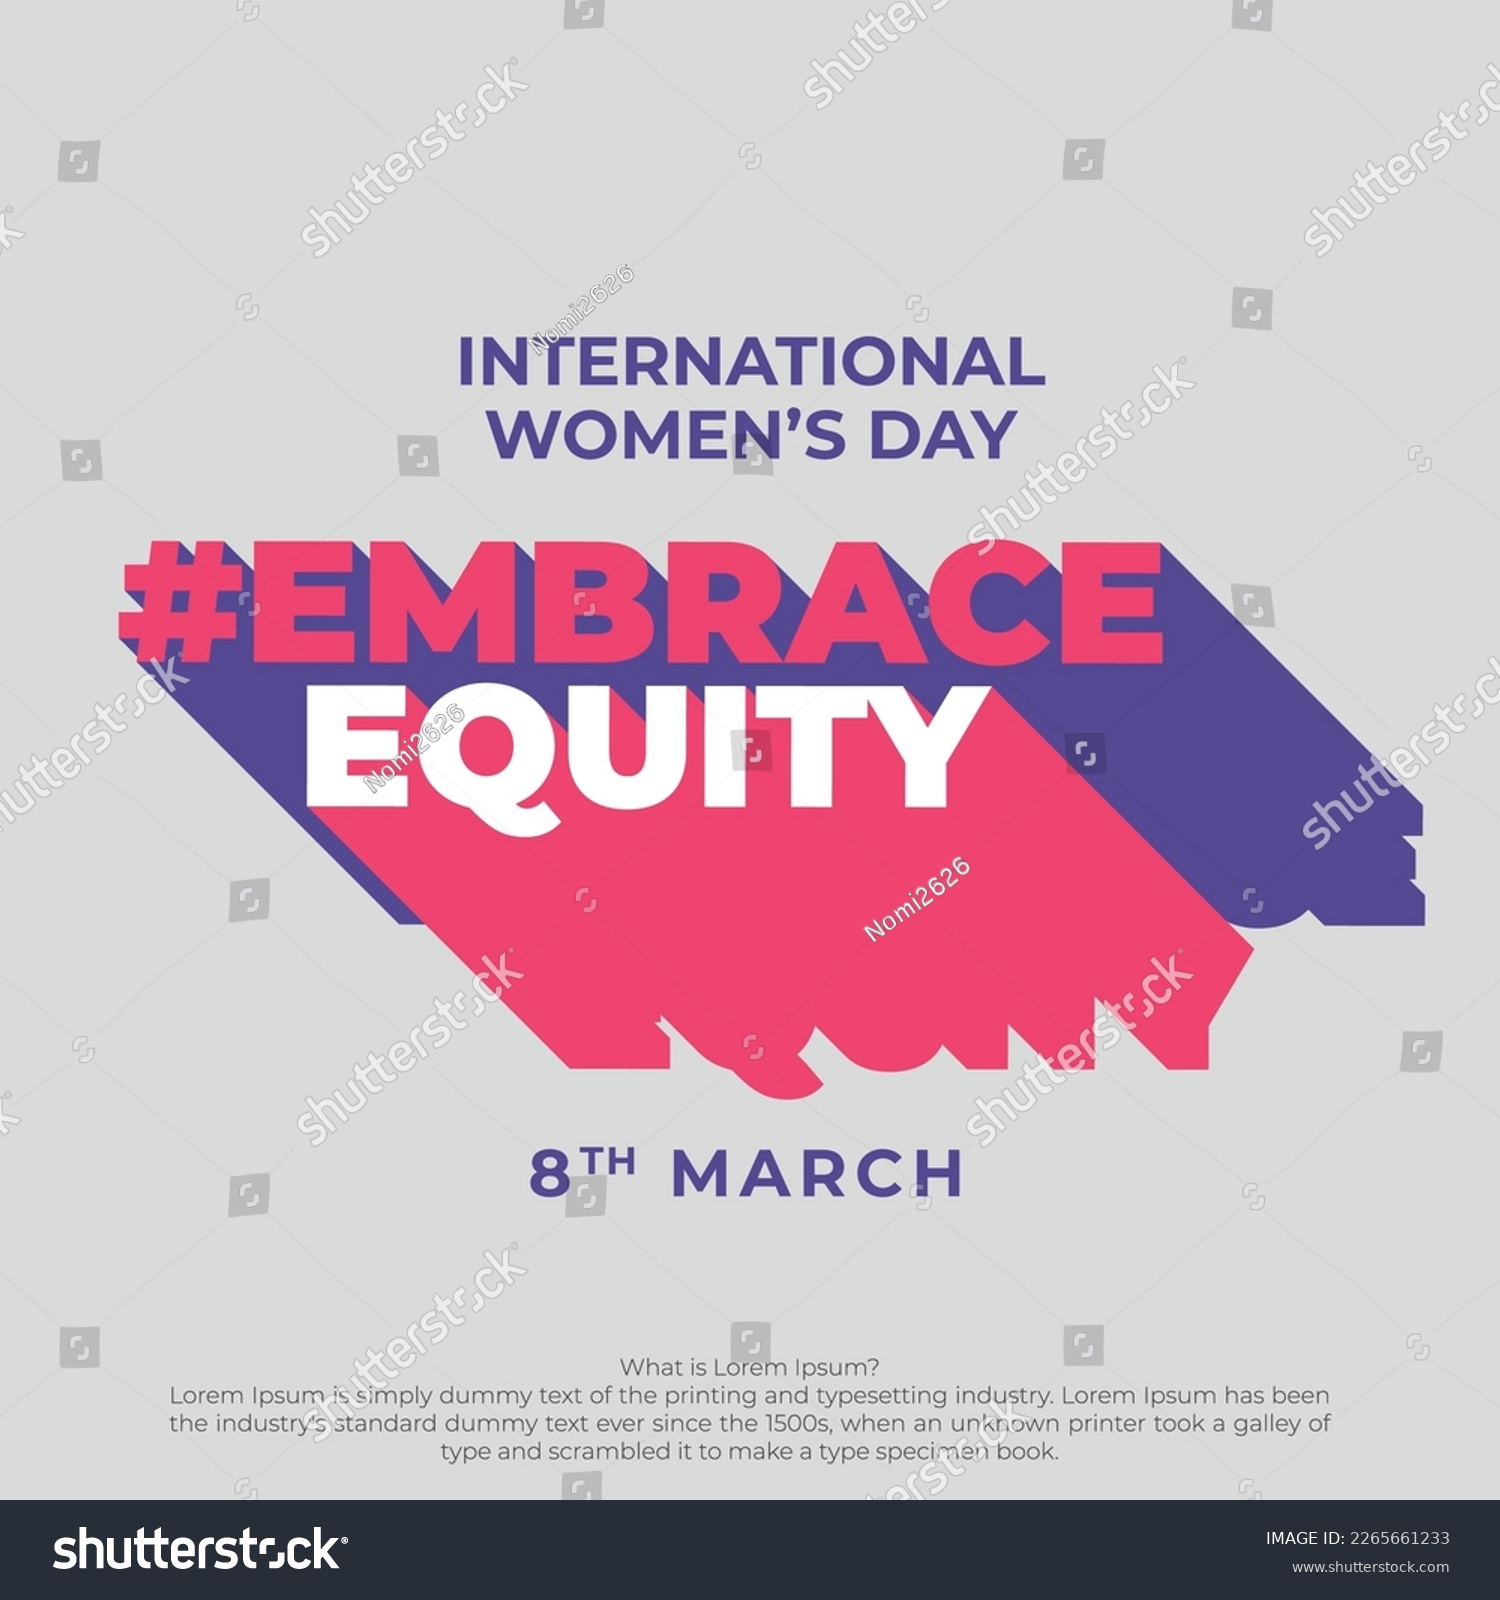 8th March hugging herself. Embrace Equity is campaign theme of International Women's Day 2023. Vector illustration. #2265661233